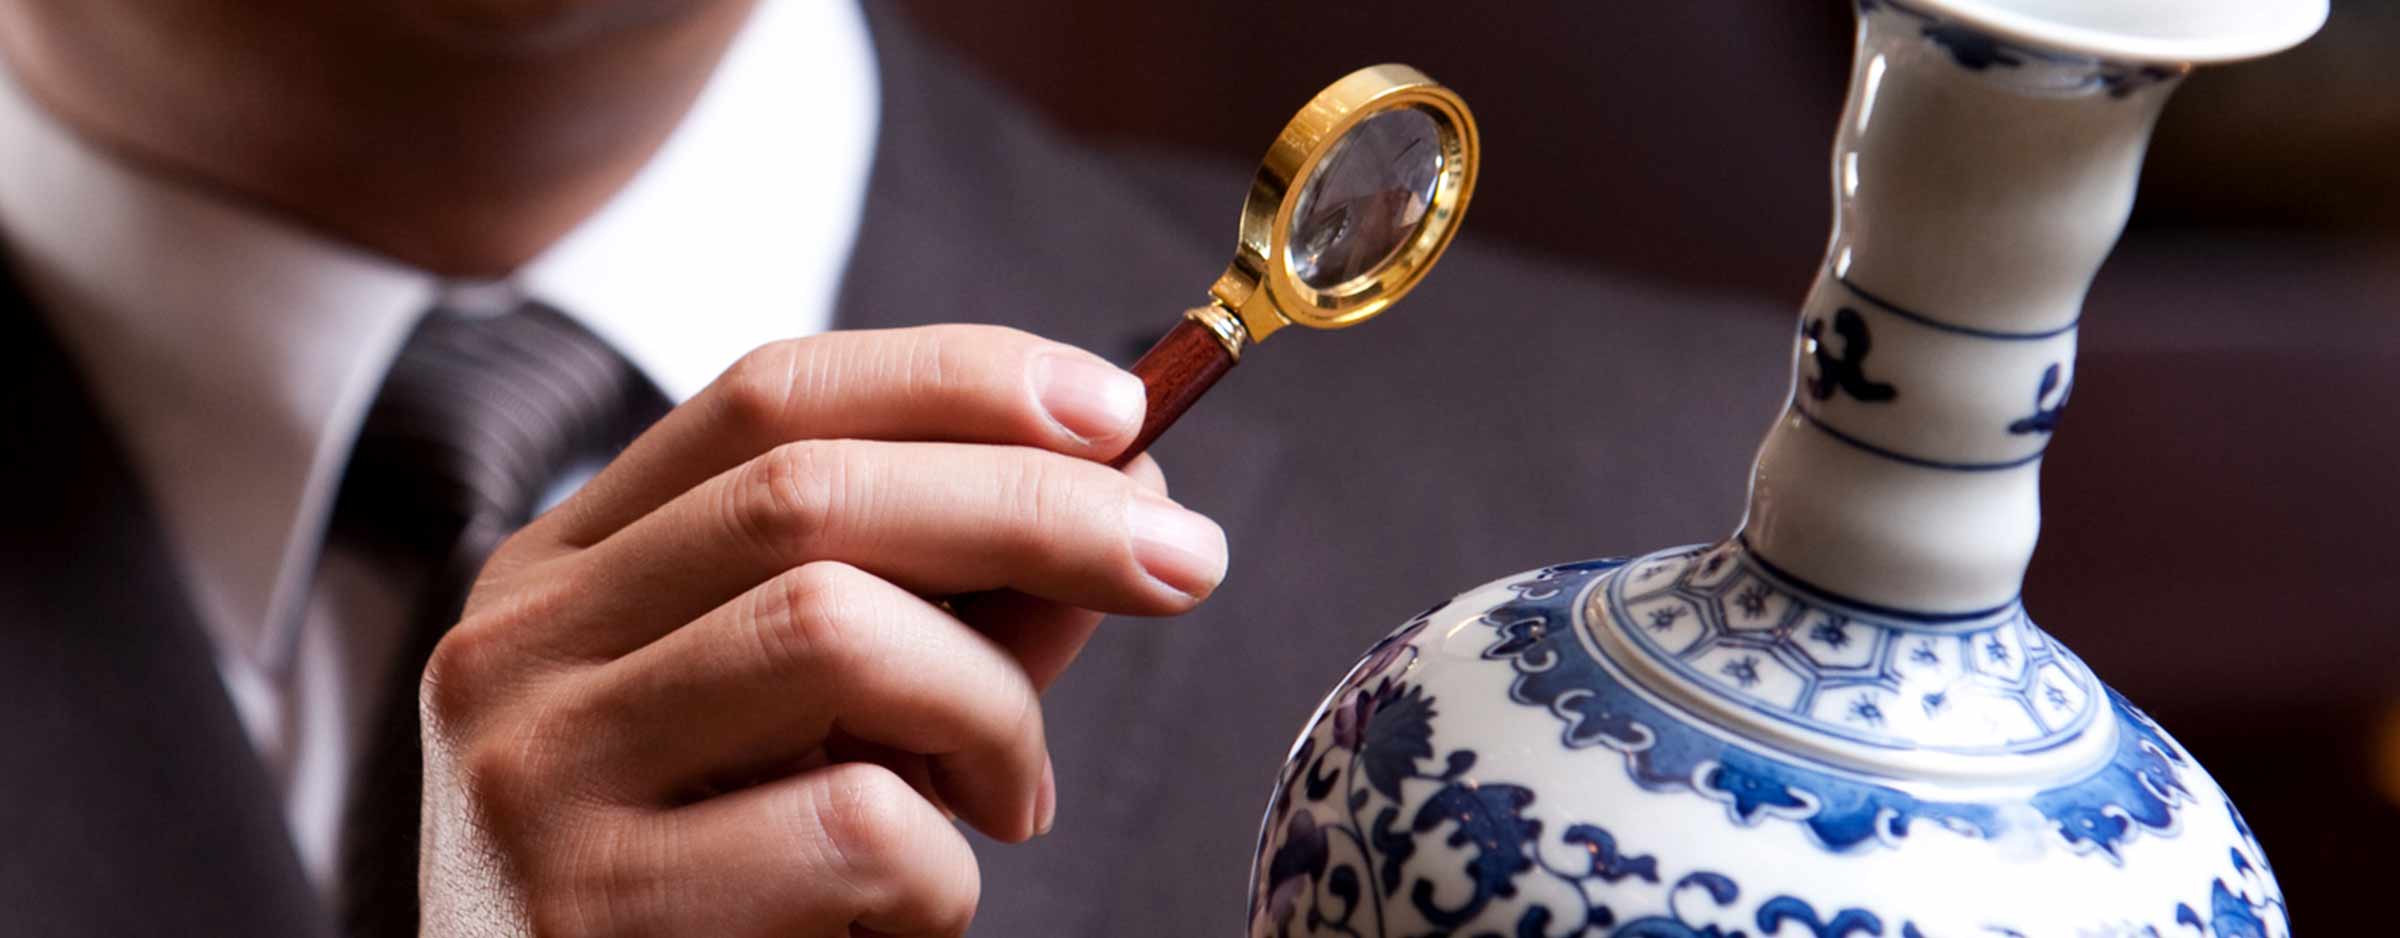 Everything to know about antique appraisals